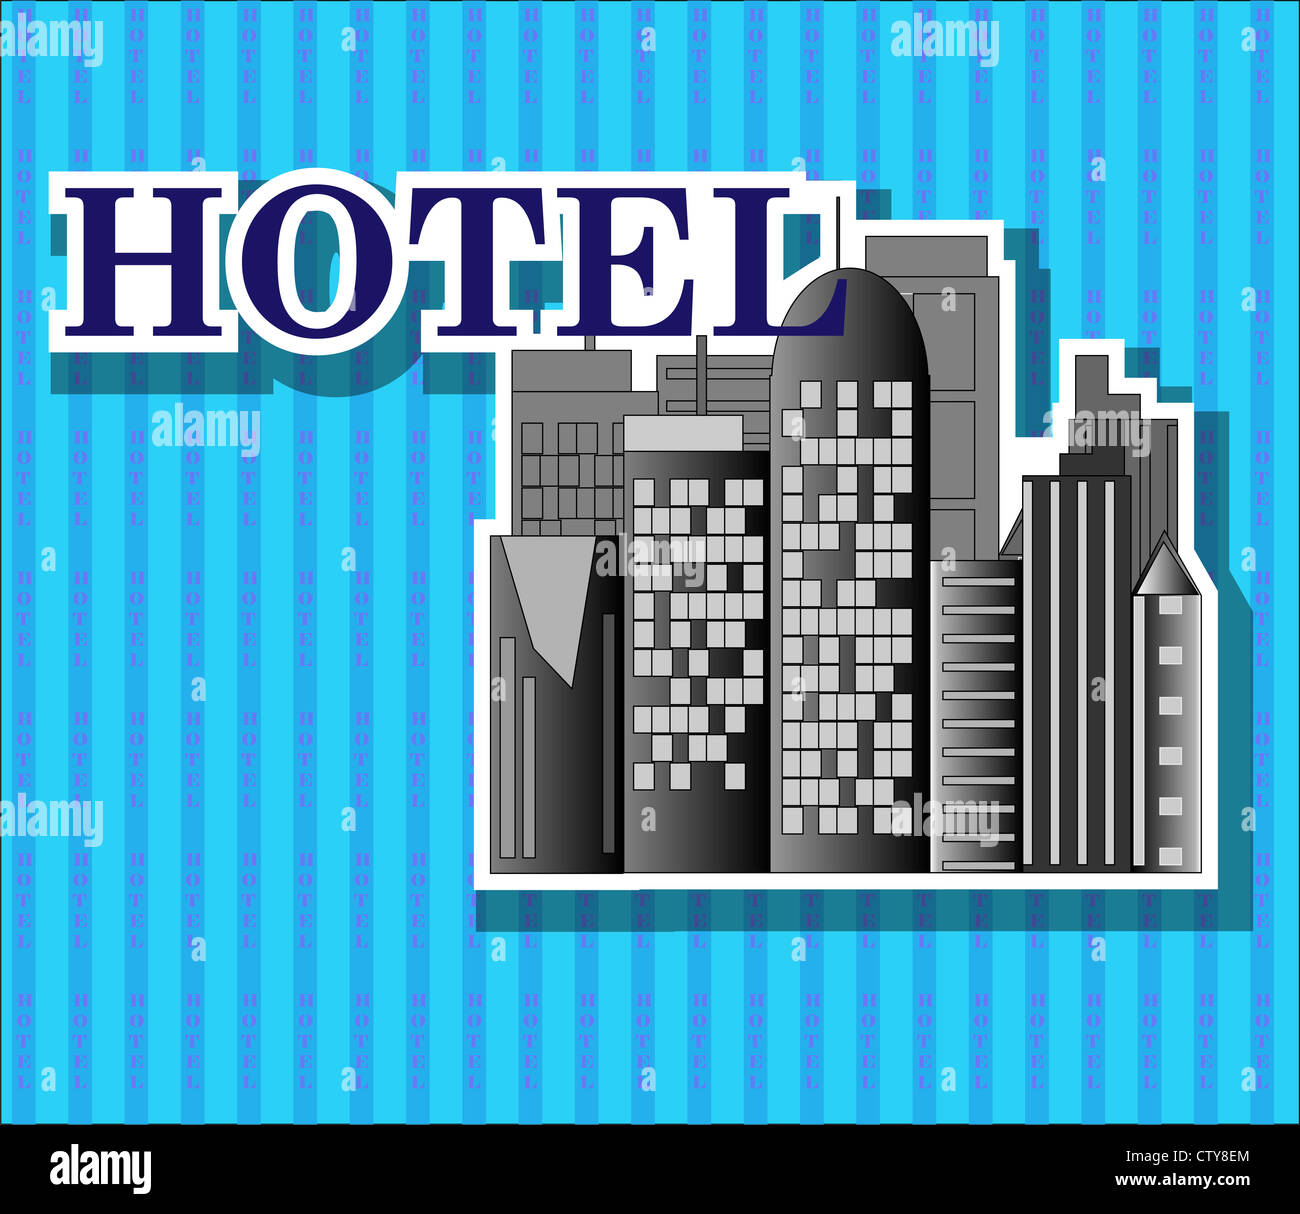 Black hotel buildings with blue background Stock Photo